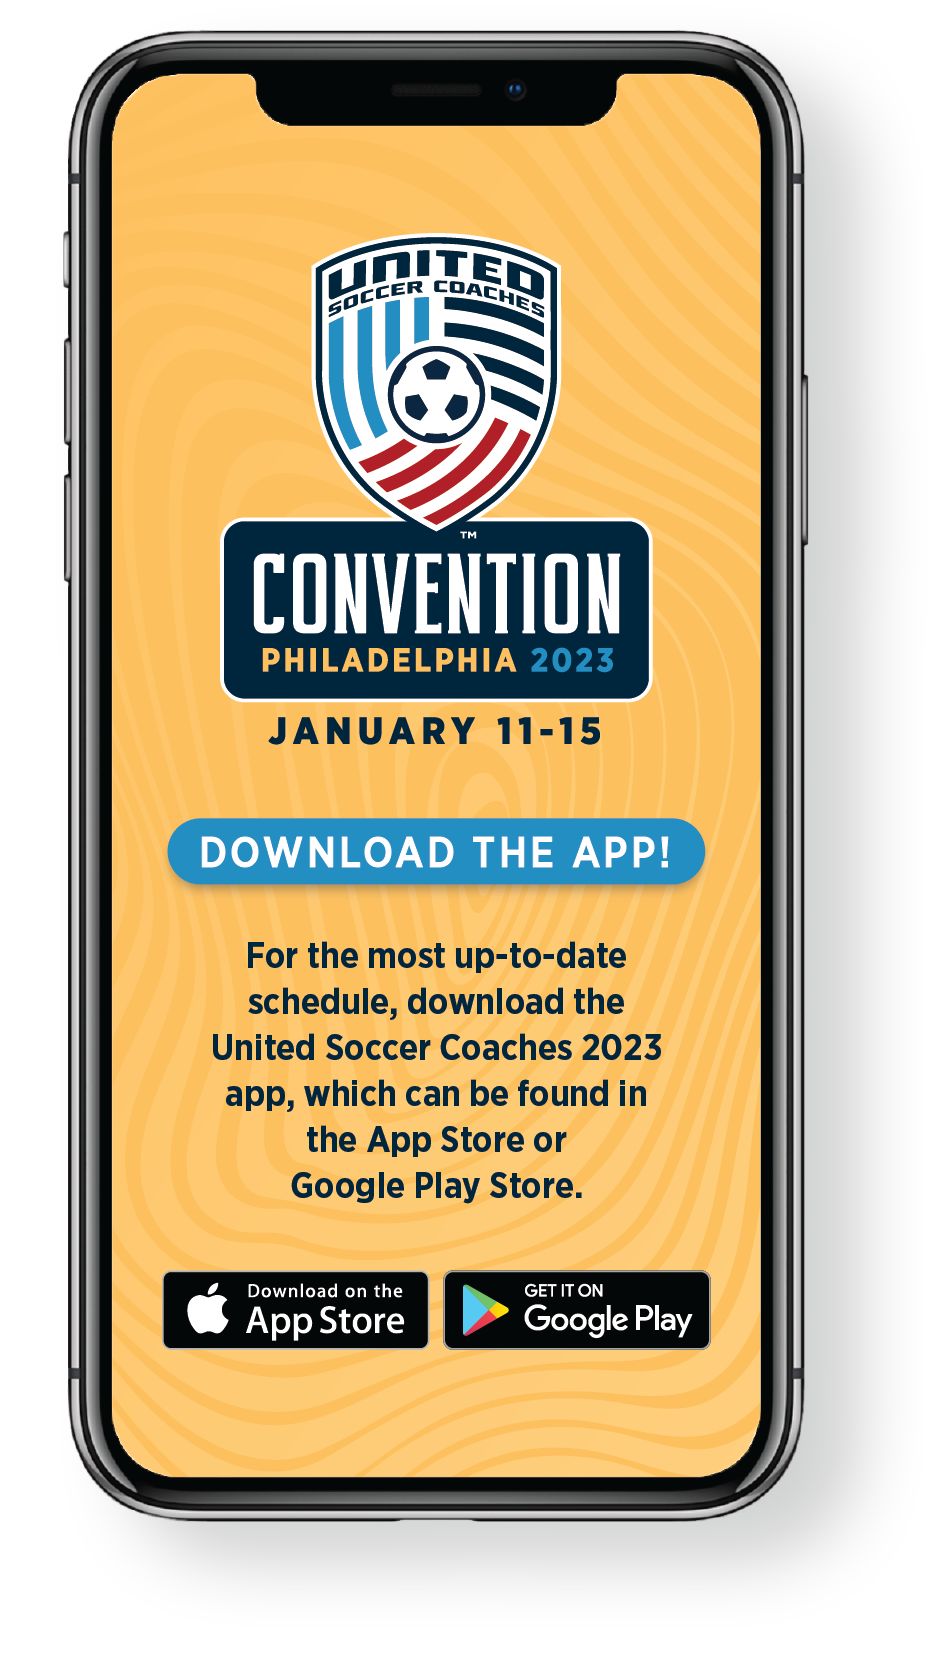 Convention Mobile App United Soccer Coaches Convention